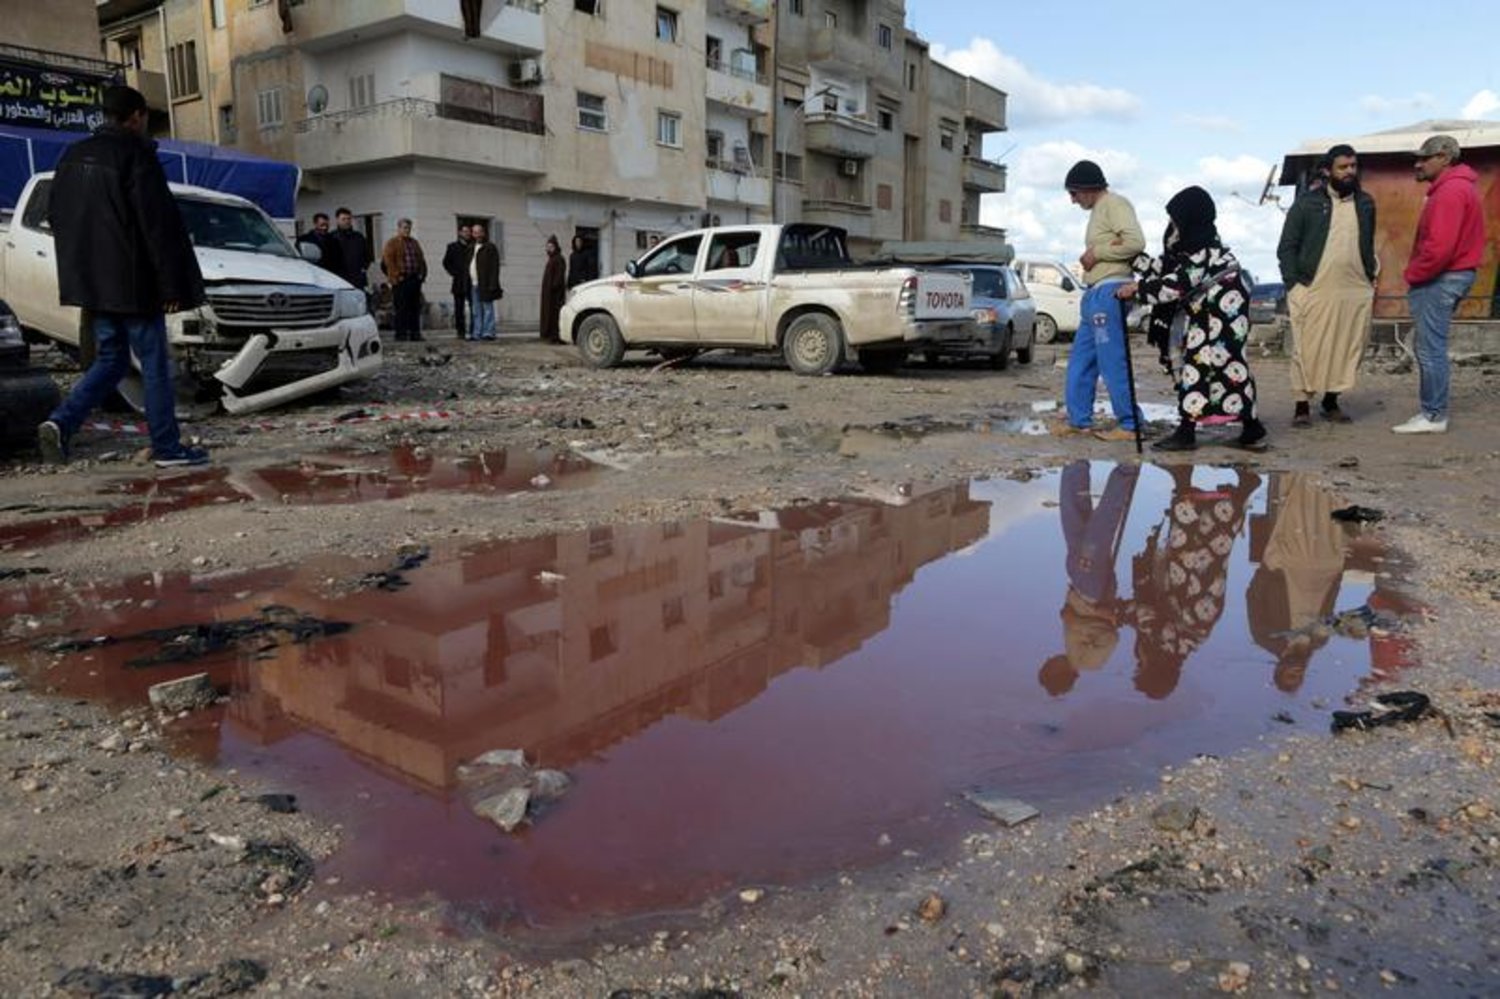 People walk near a puddle of water mixed with blood at the site of twin car bombs in Benghazi that resulted in scores of deaths and injuries, Libya, January 24, 2018. (Reuters)